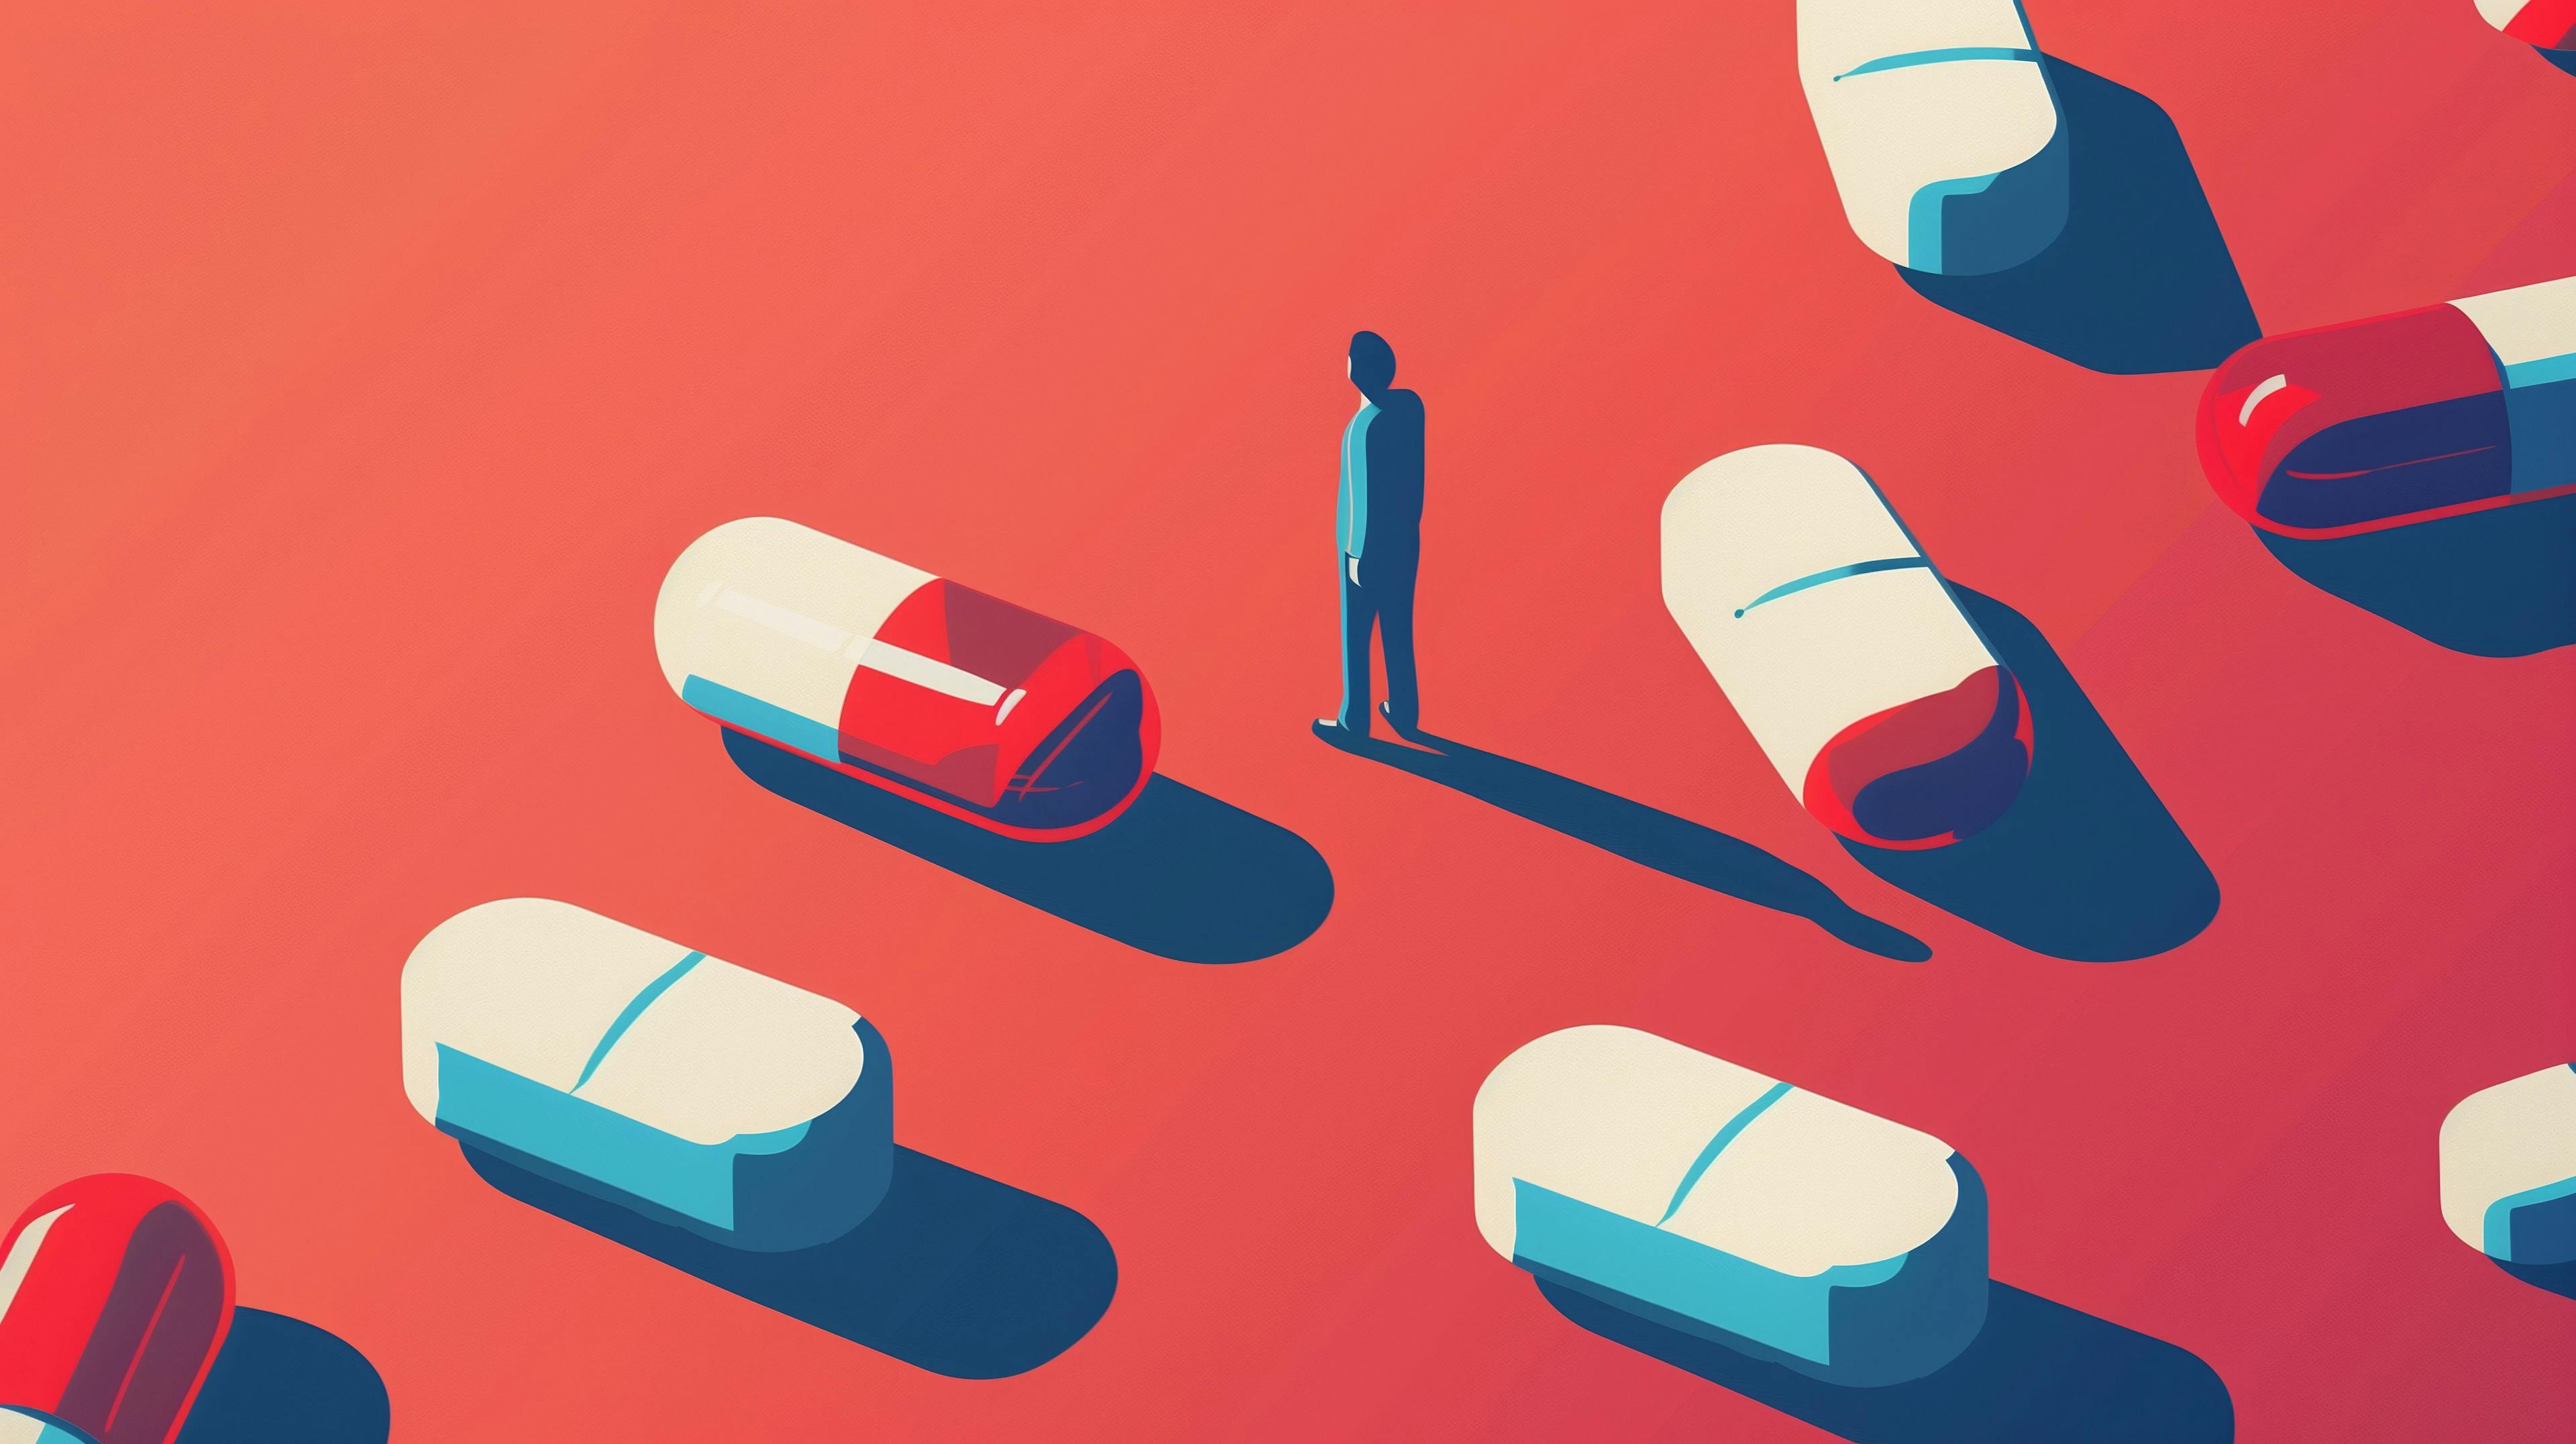 Illustration of person surrounded by medications | Image Credit: Geekminds - stock.adobe.com